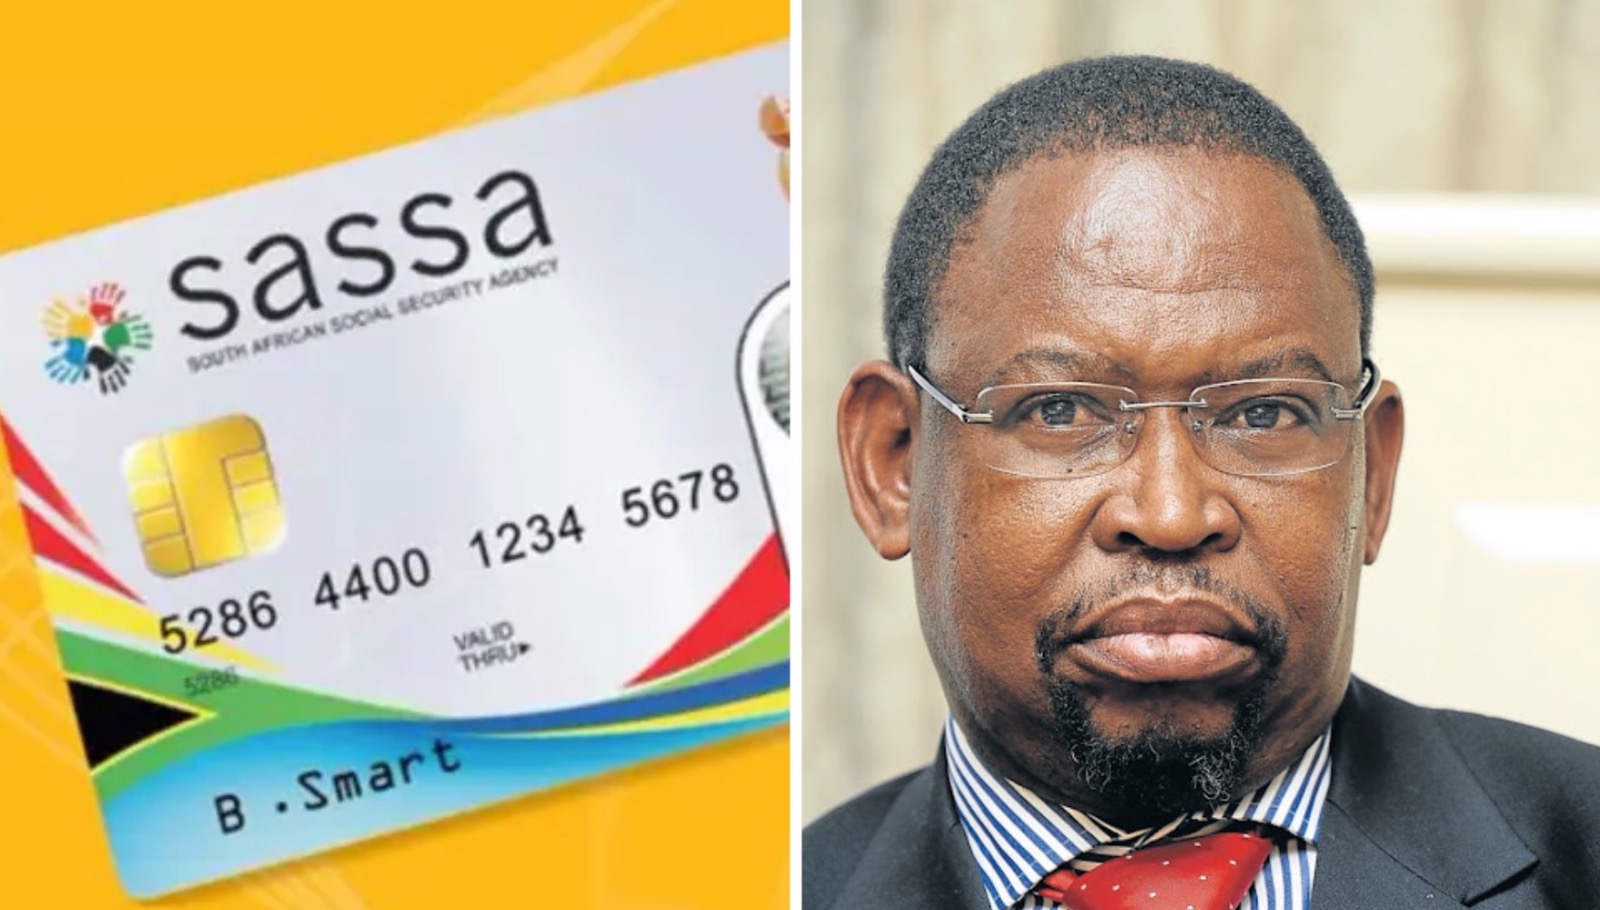 Steps To Check Your R350 Grant Status For November Step 1: Visit the Sassa SRD grant website Step 2: Scroll down to the 'South African ID Holders' and click the 'click here to proceed' tab Then, scroll down to 'Application status' for your SRD grant Step 4: Click on 'Click here to check online' Step 5: Fill in your ID number and the phone number that you used for your application, then click 'submit' Step 6: You should then be able to see the SRD status of your R350 grant application